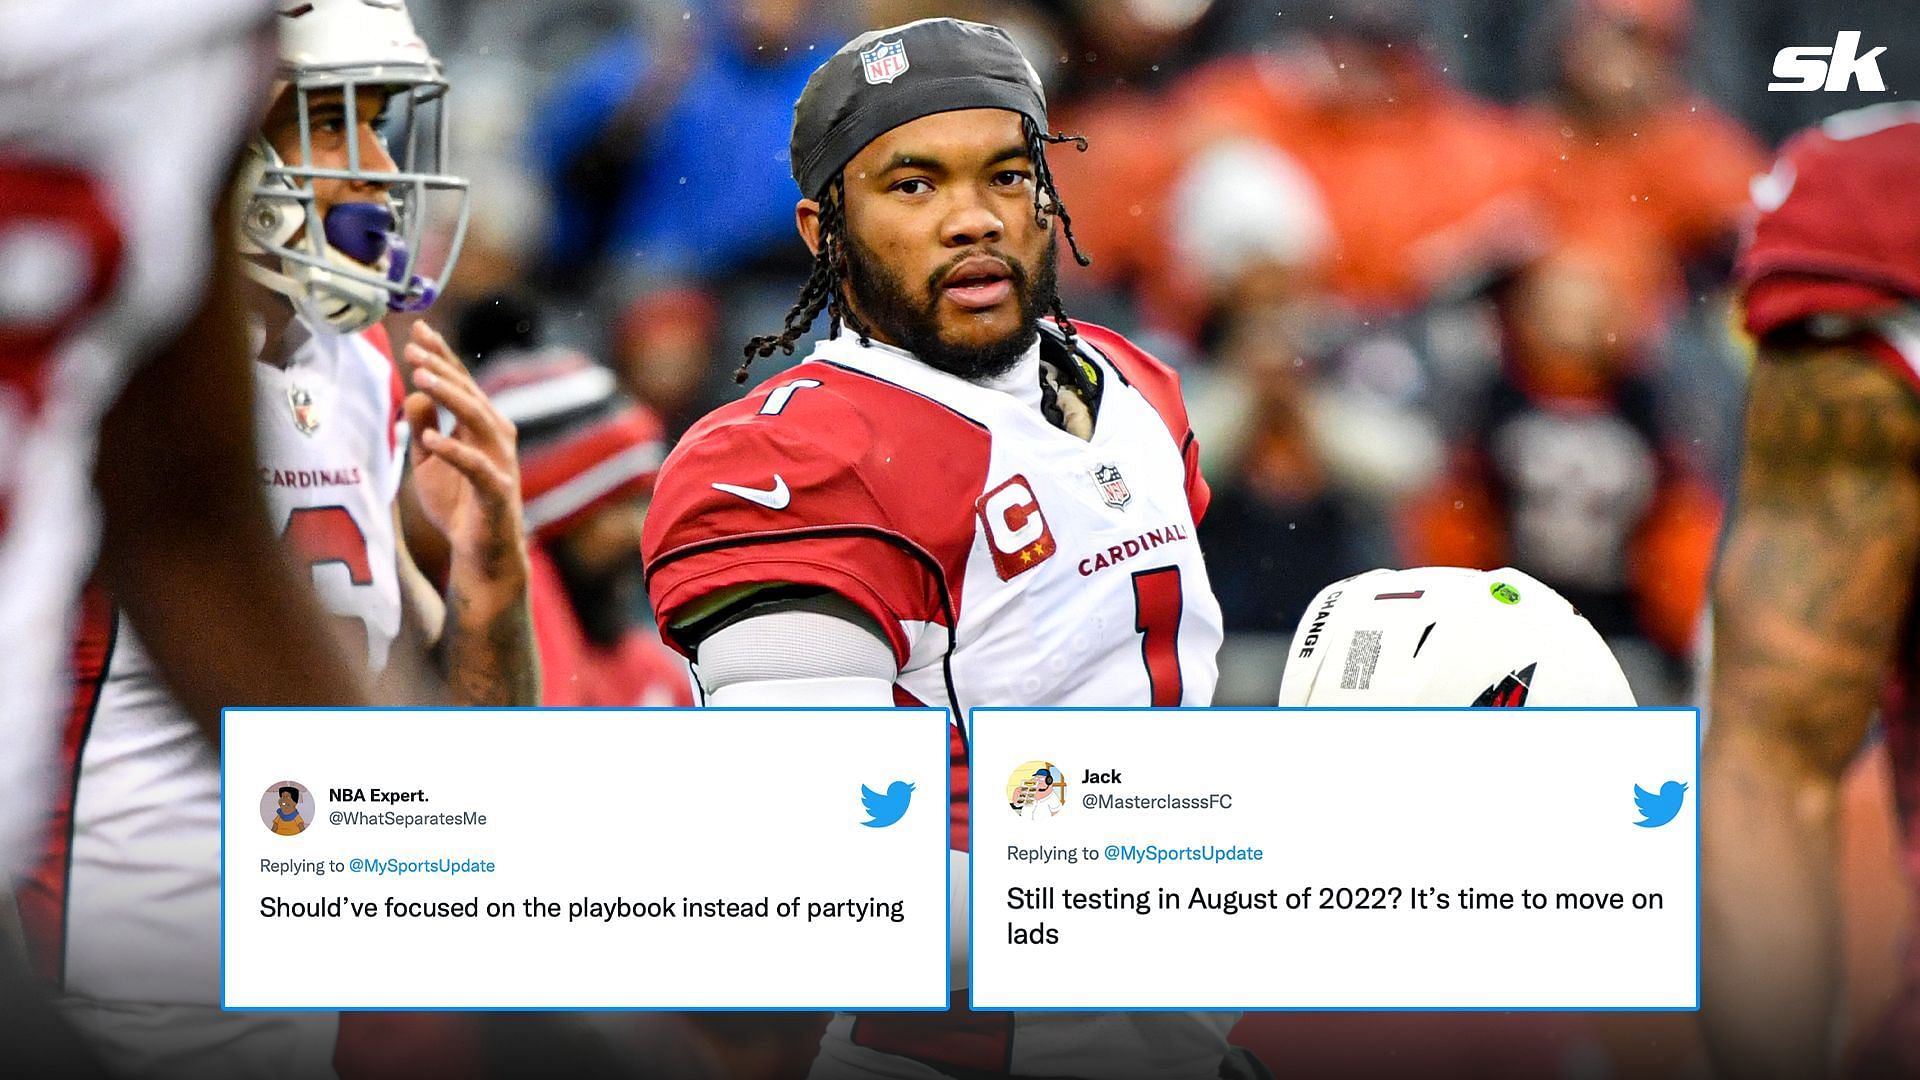 NFL fans react to Kyler Murray testing COVID positive